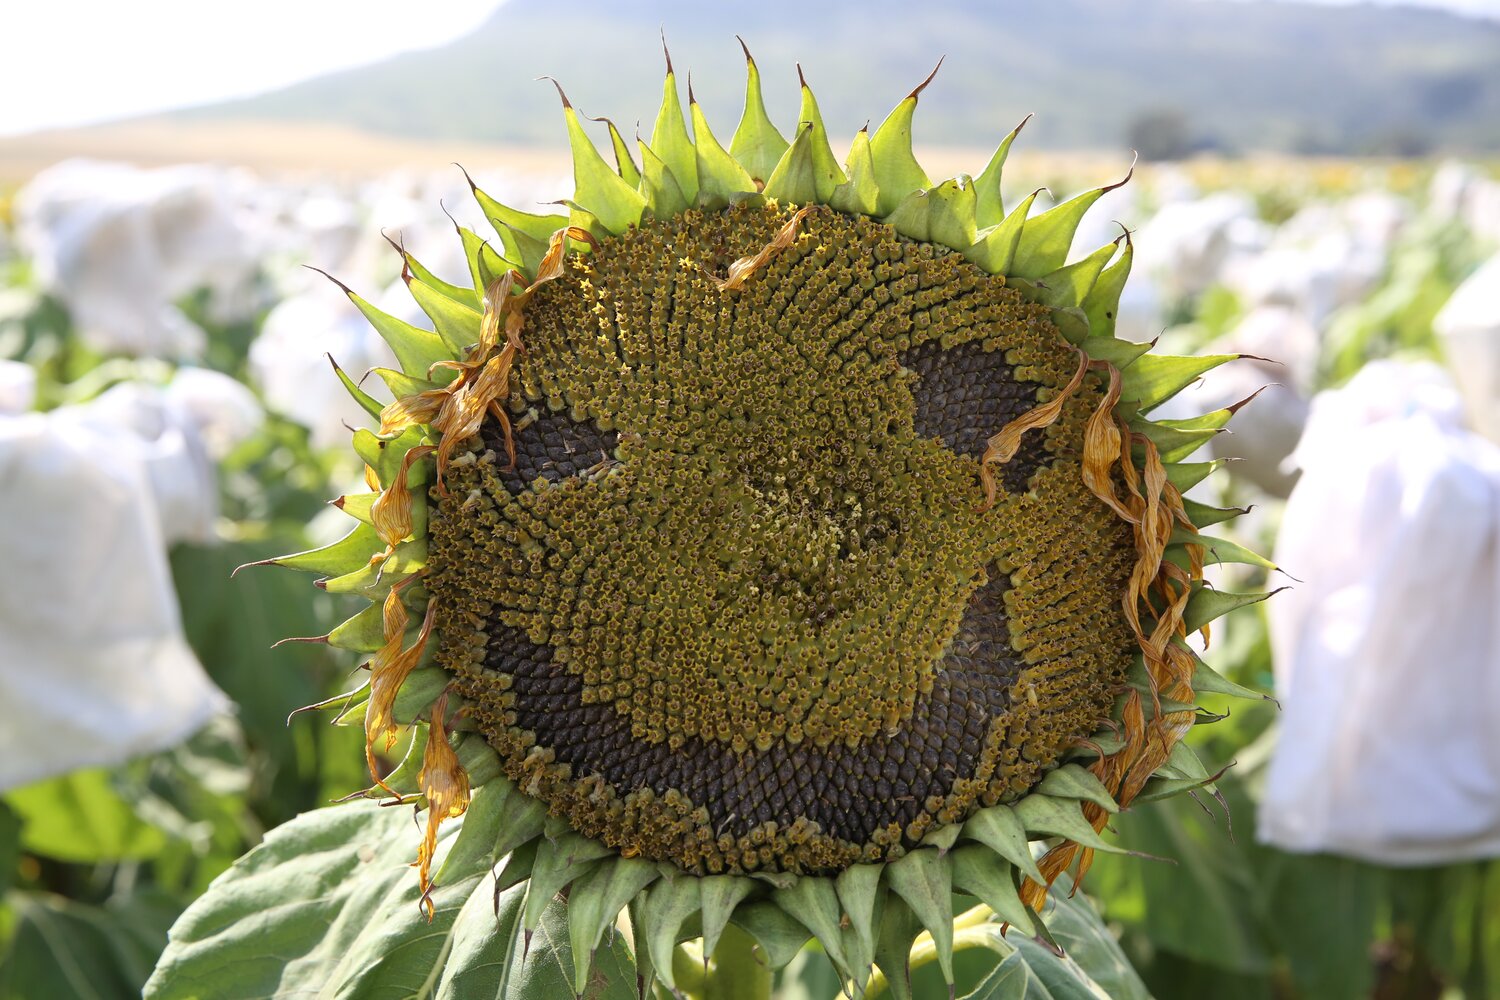 We finish this slideshow with an image and text that I tweeted out at the time: “I cannot not smile. I’m in Argentina, with folks who are passionate about using biodiversity to bring solutions to farmers, like the Crop Wild Relatives sunflower pre-breeding partners INTA, who are screening hundreds of lines to find resistance to fungal diseases.”